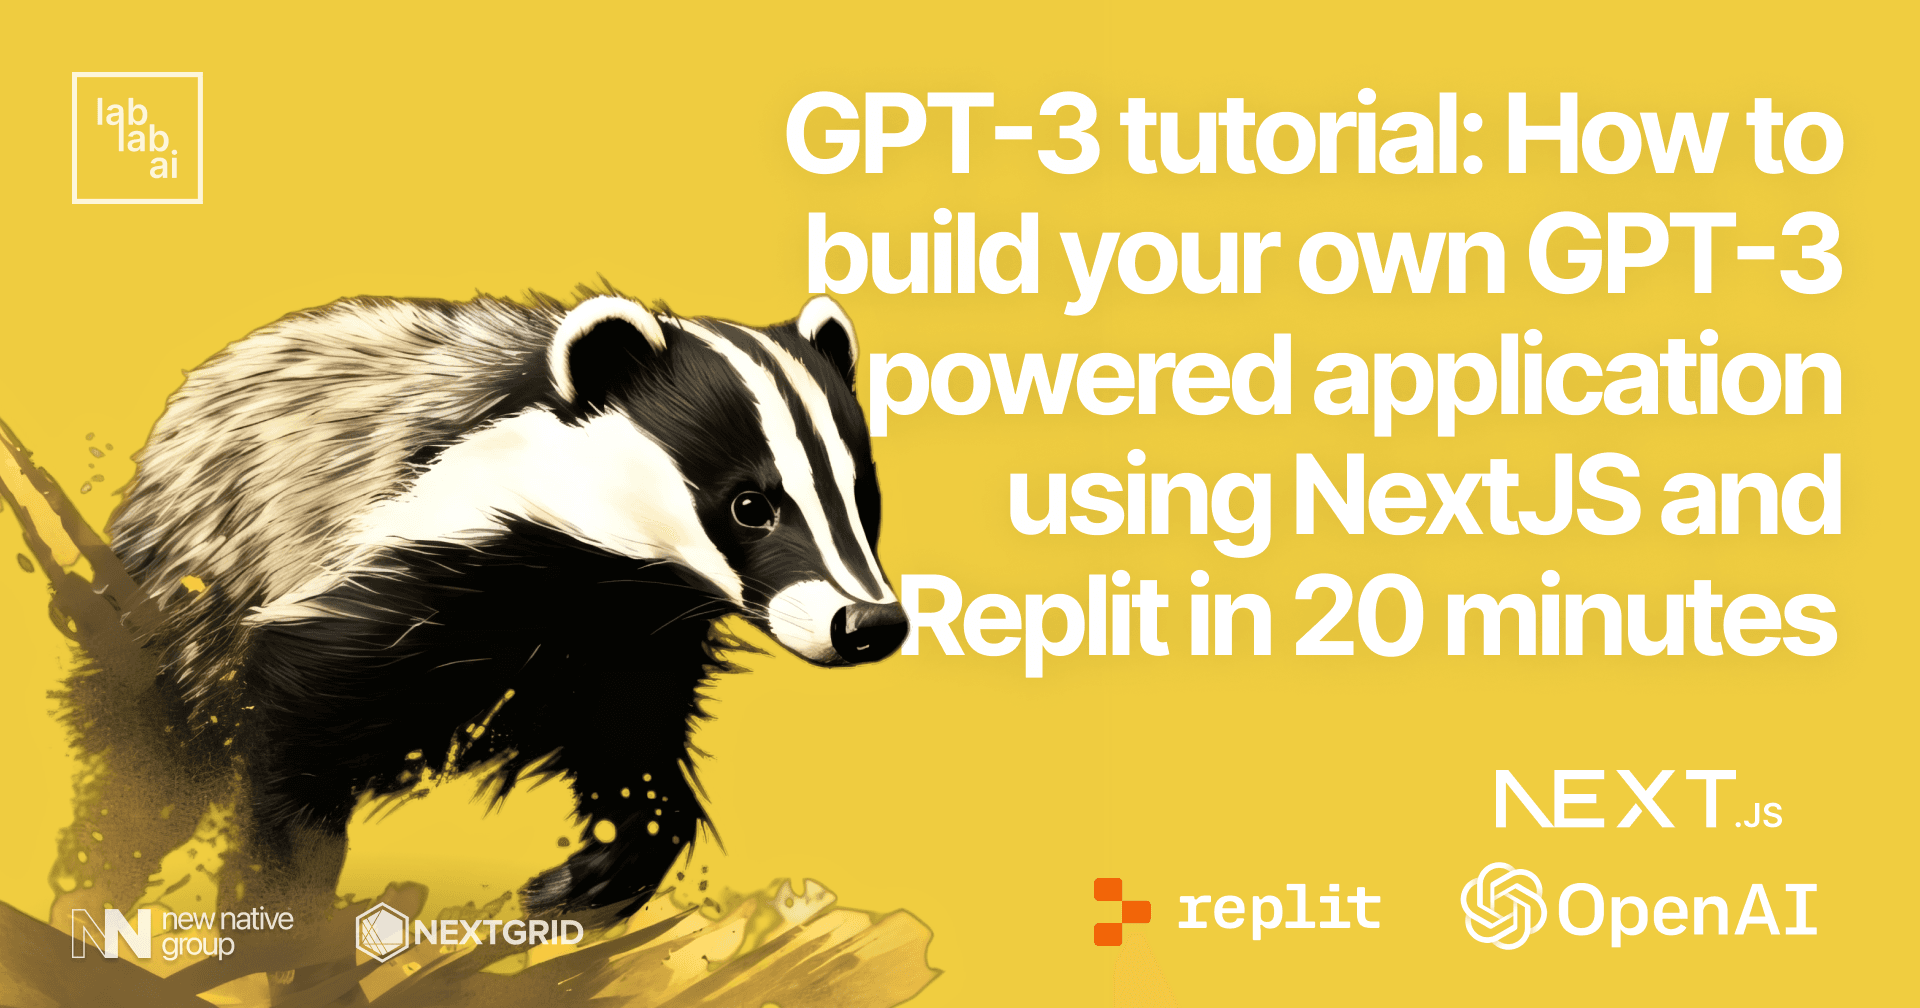 GPT-3 tutorial: How to build your own GPT-3 powered application using NextJS and Replit in 20 minutes